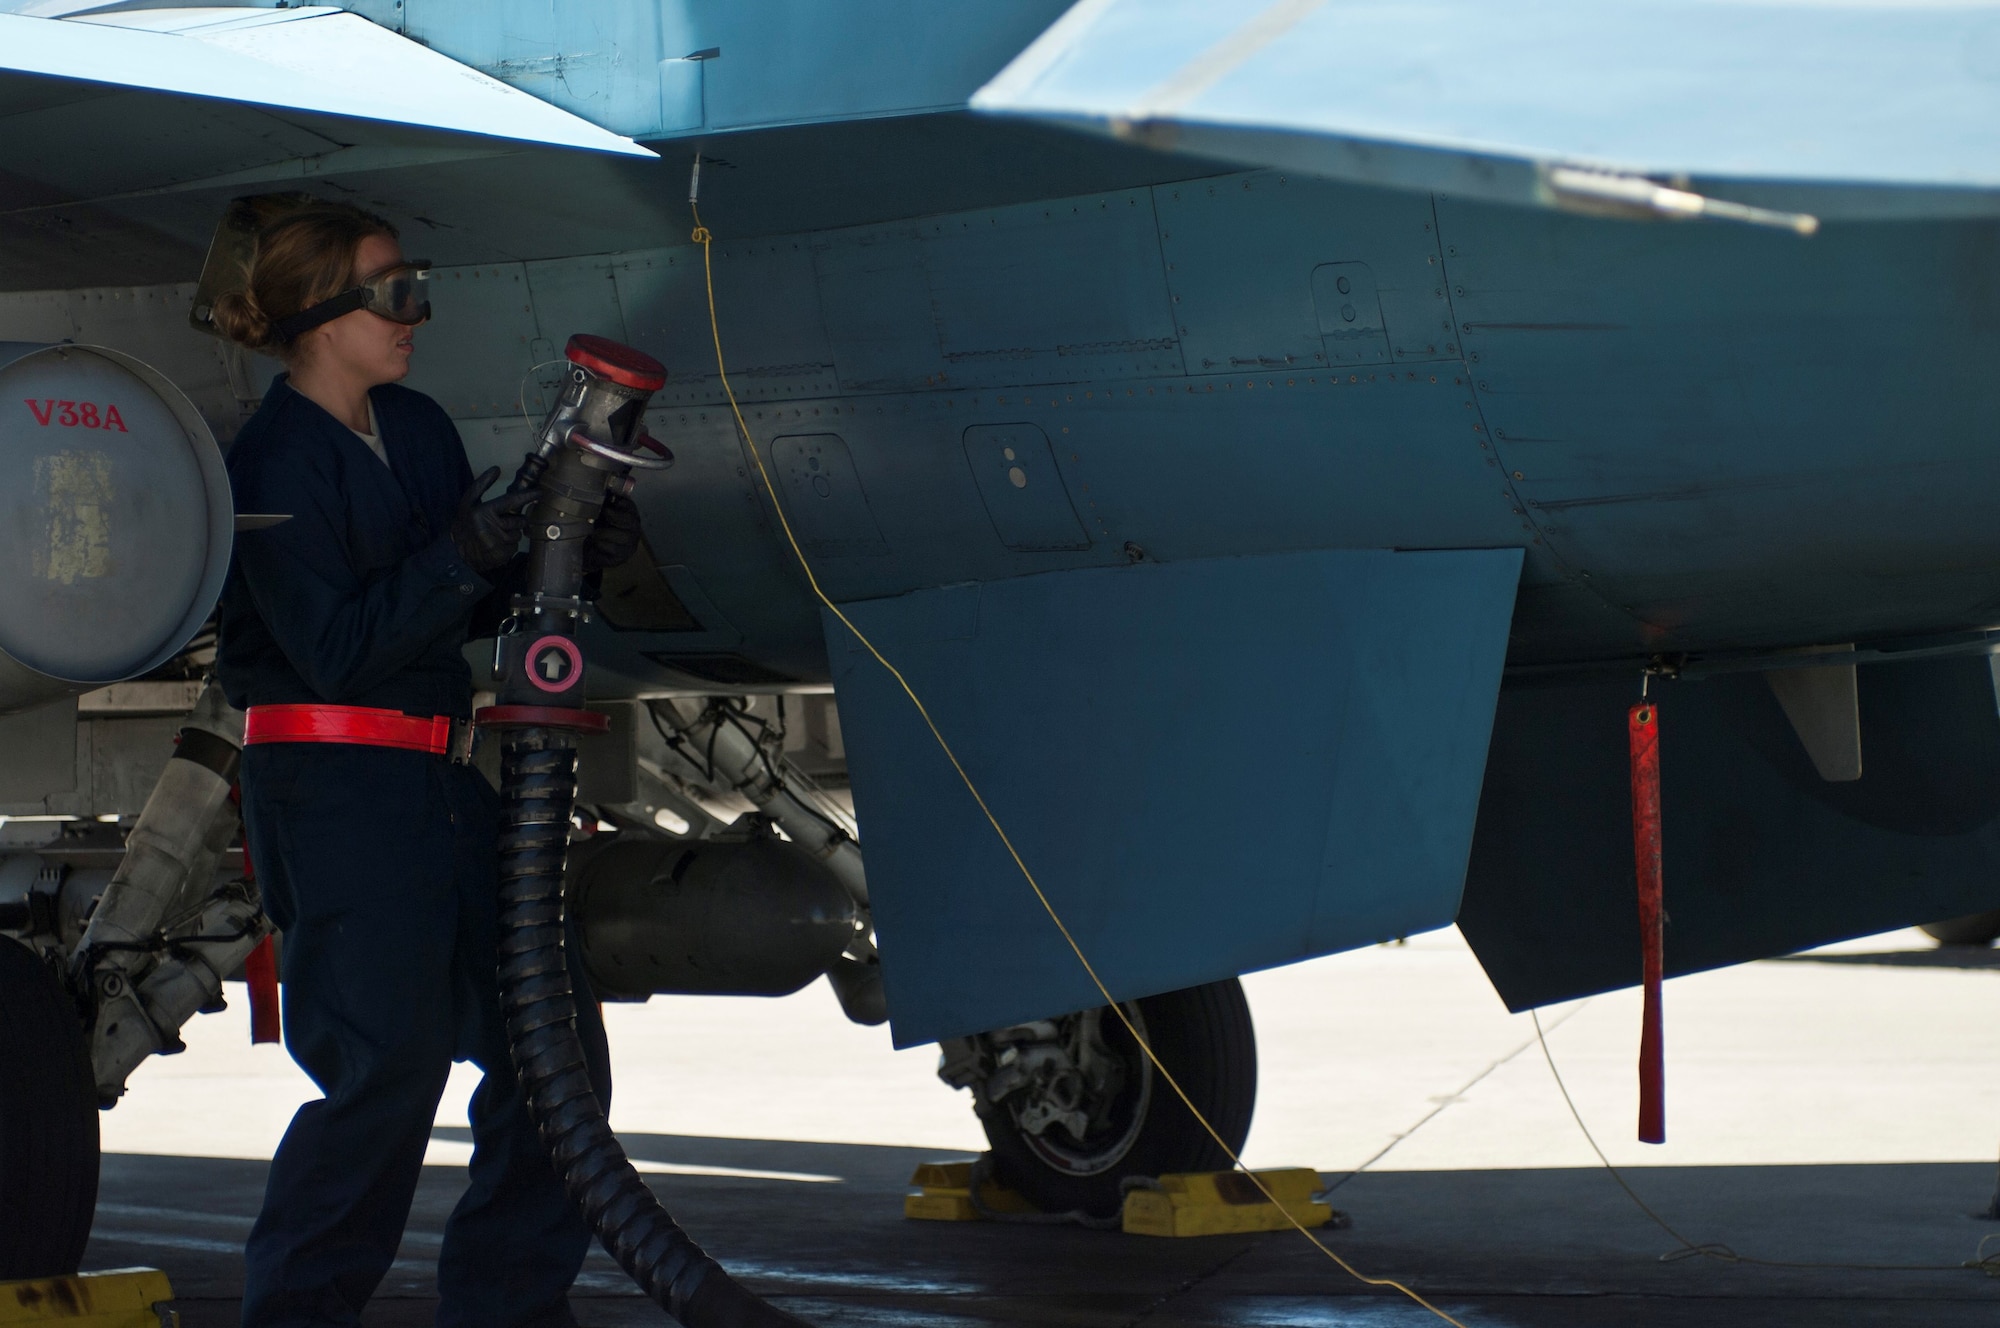 Staff Sgt. Chelsea Mays disconnects a fuel hose as part of preflight preparations for a 64th Aggressor Squadron F-16 Fighting Falcon Aug. 13, 2013, at Nellis Air Force Base, Nev. It is the crew chief's responsibility to ensure the aircraft is properly refueled before each training mission.  Mays is a F-16 crew chief assigned to the 926th Aircraft Maintenance Squadron. (U.S. Air Force photo/Airman 1st Class Joshua Kleinholz)

